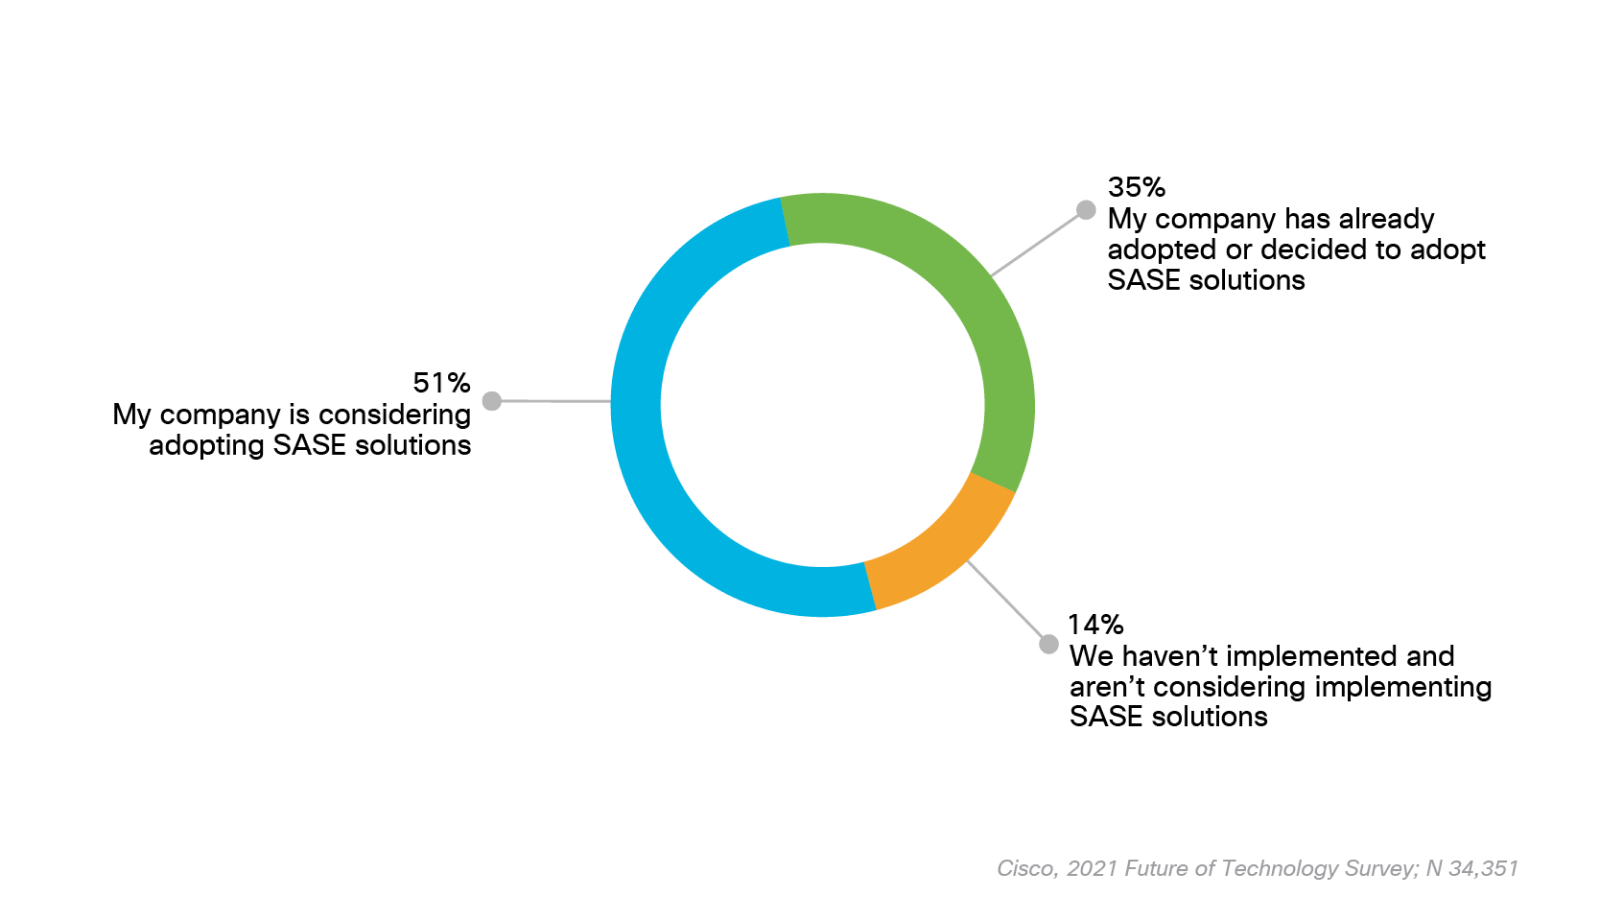 Graph showing percentage of respondents considering adopting SASE solutions.